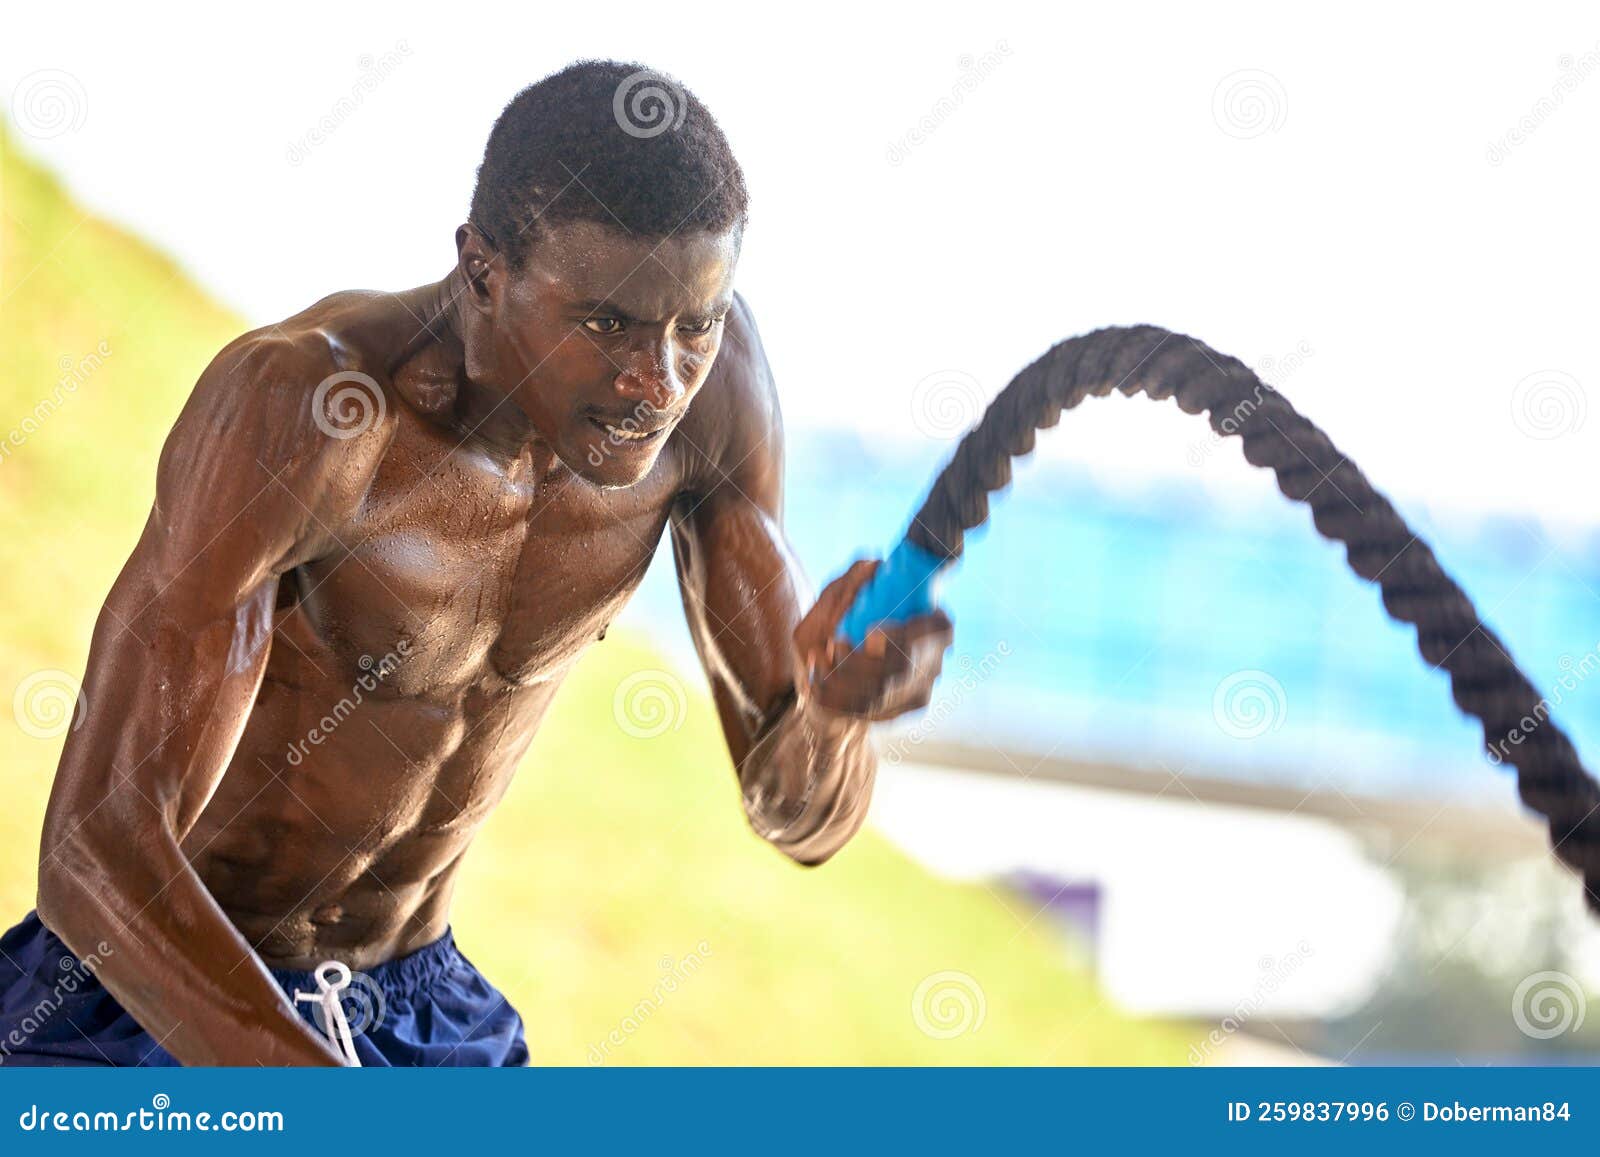 Rope Workout. Sport Man Doing Battle Ropes Exercise Outdoor Stock